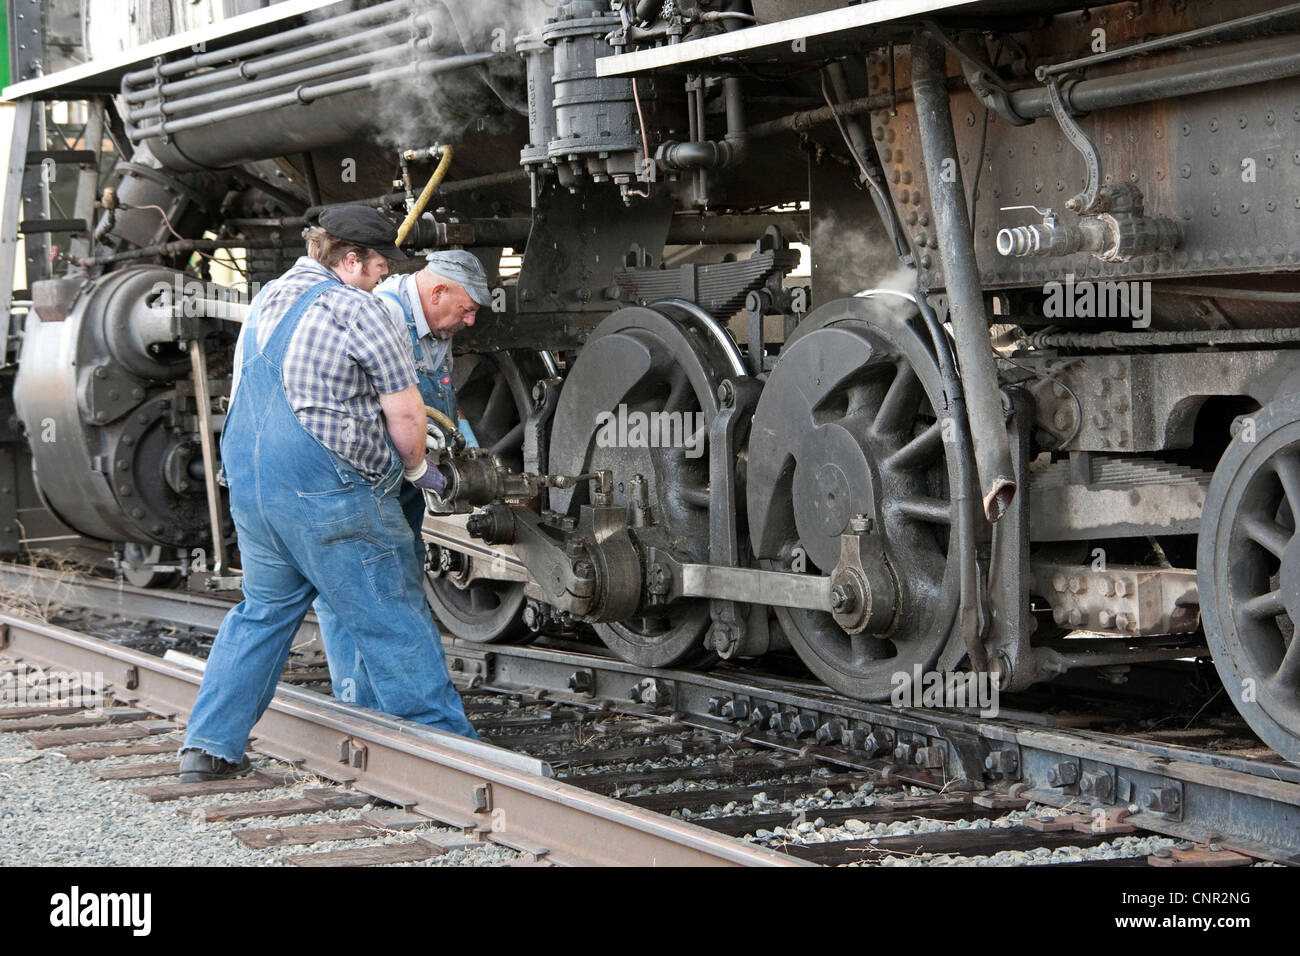 Engineers work on the Virginia and Truckee Railroad tourist train that runs between Carson City and Virginia City, Nevada, USA Stock Photo